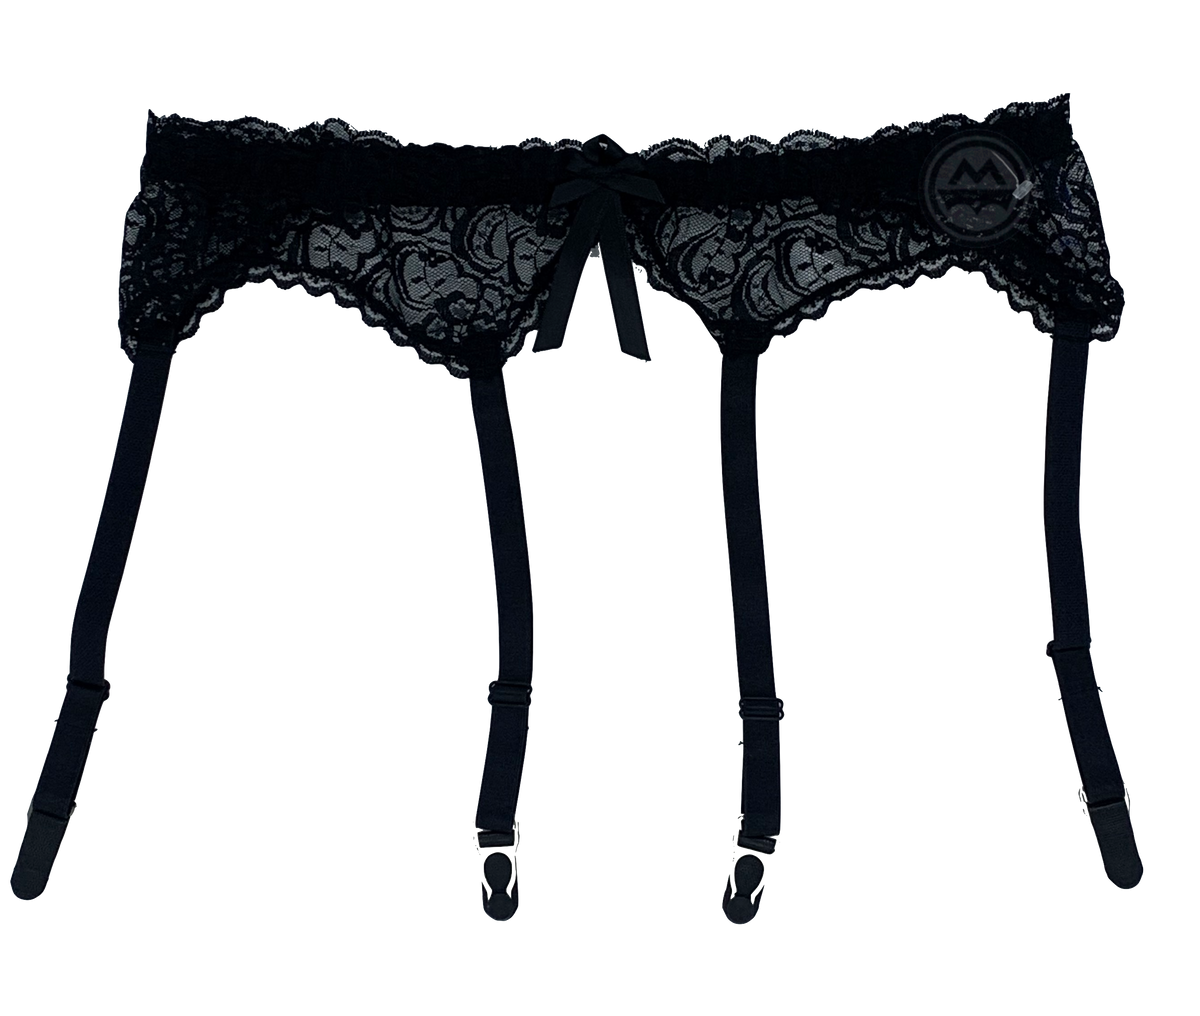 Scalloped Lace Garter Belt with Bow - Black - Model Express Vancouver